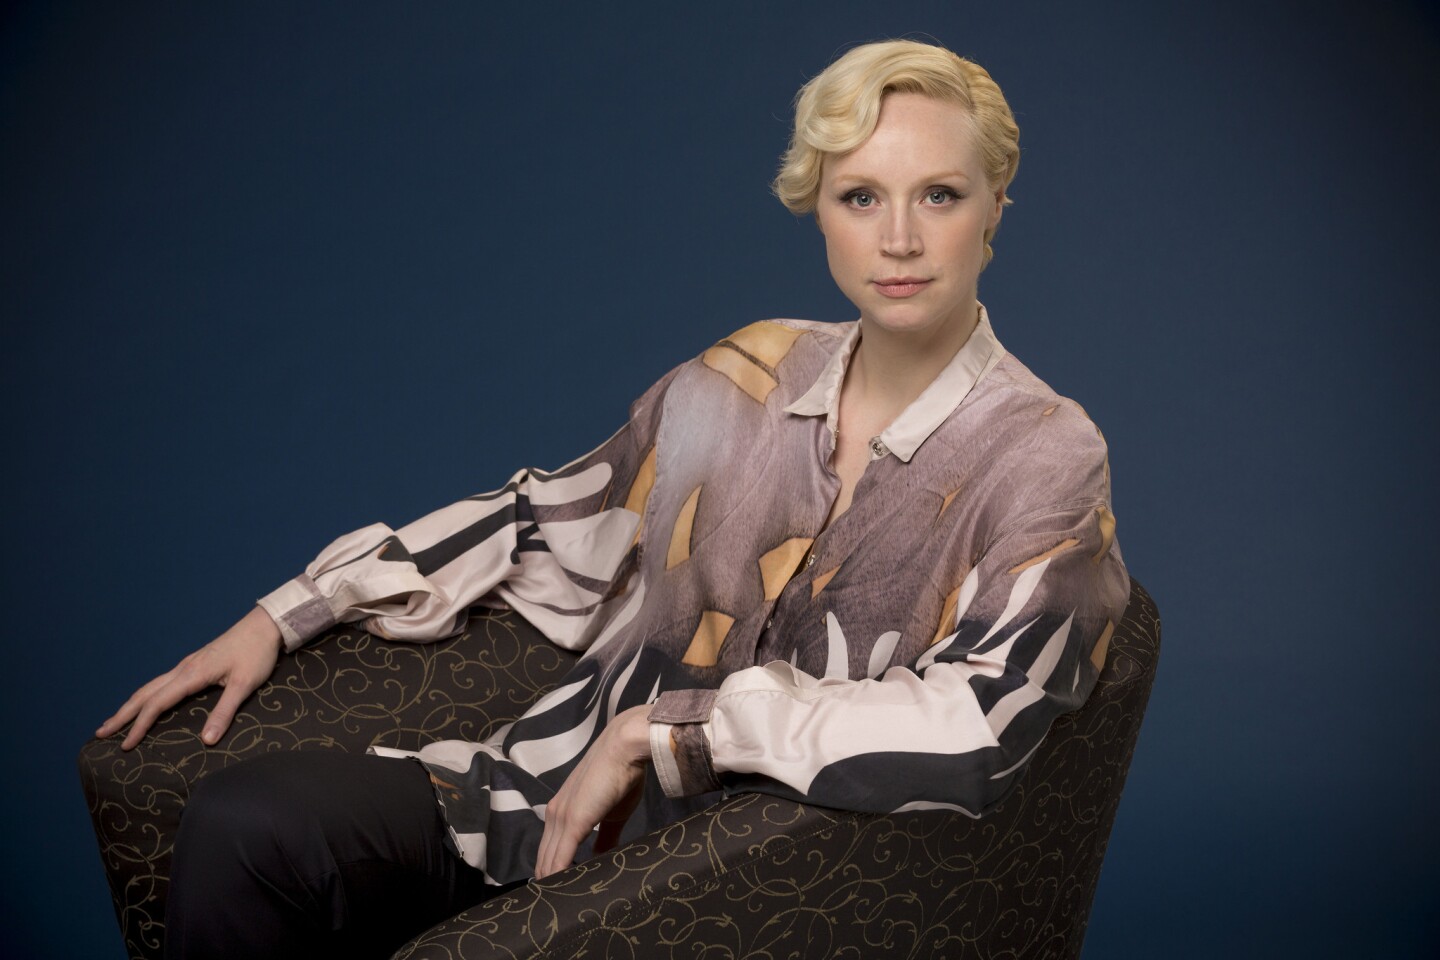 LOS ANGELES - CA - SEPTEMBER 16, 2015 - Actress Gwendoline Christie photographed in the Los Angeles Times studio, September 16, 2015. She is starring in HBO's Game of Thrones, the final Hunger Games movie and the next Star Wars films. (Ricardo DeAratanha/Los Angeles Times)